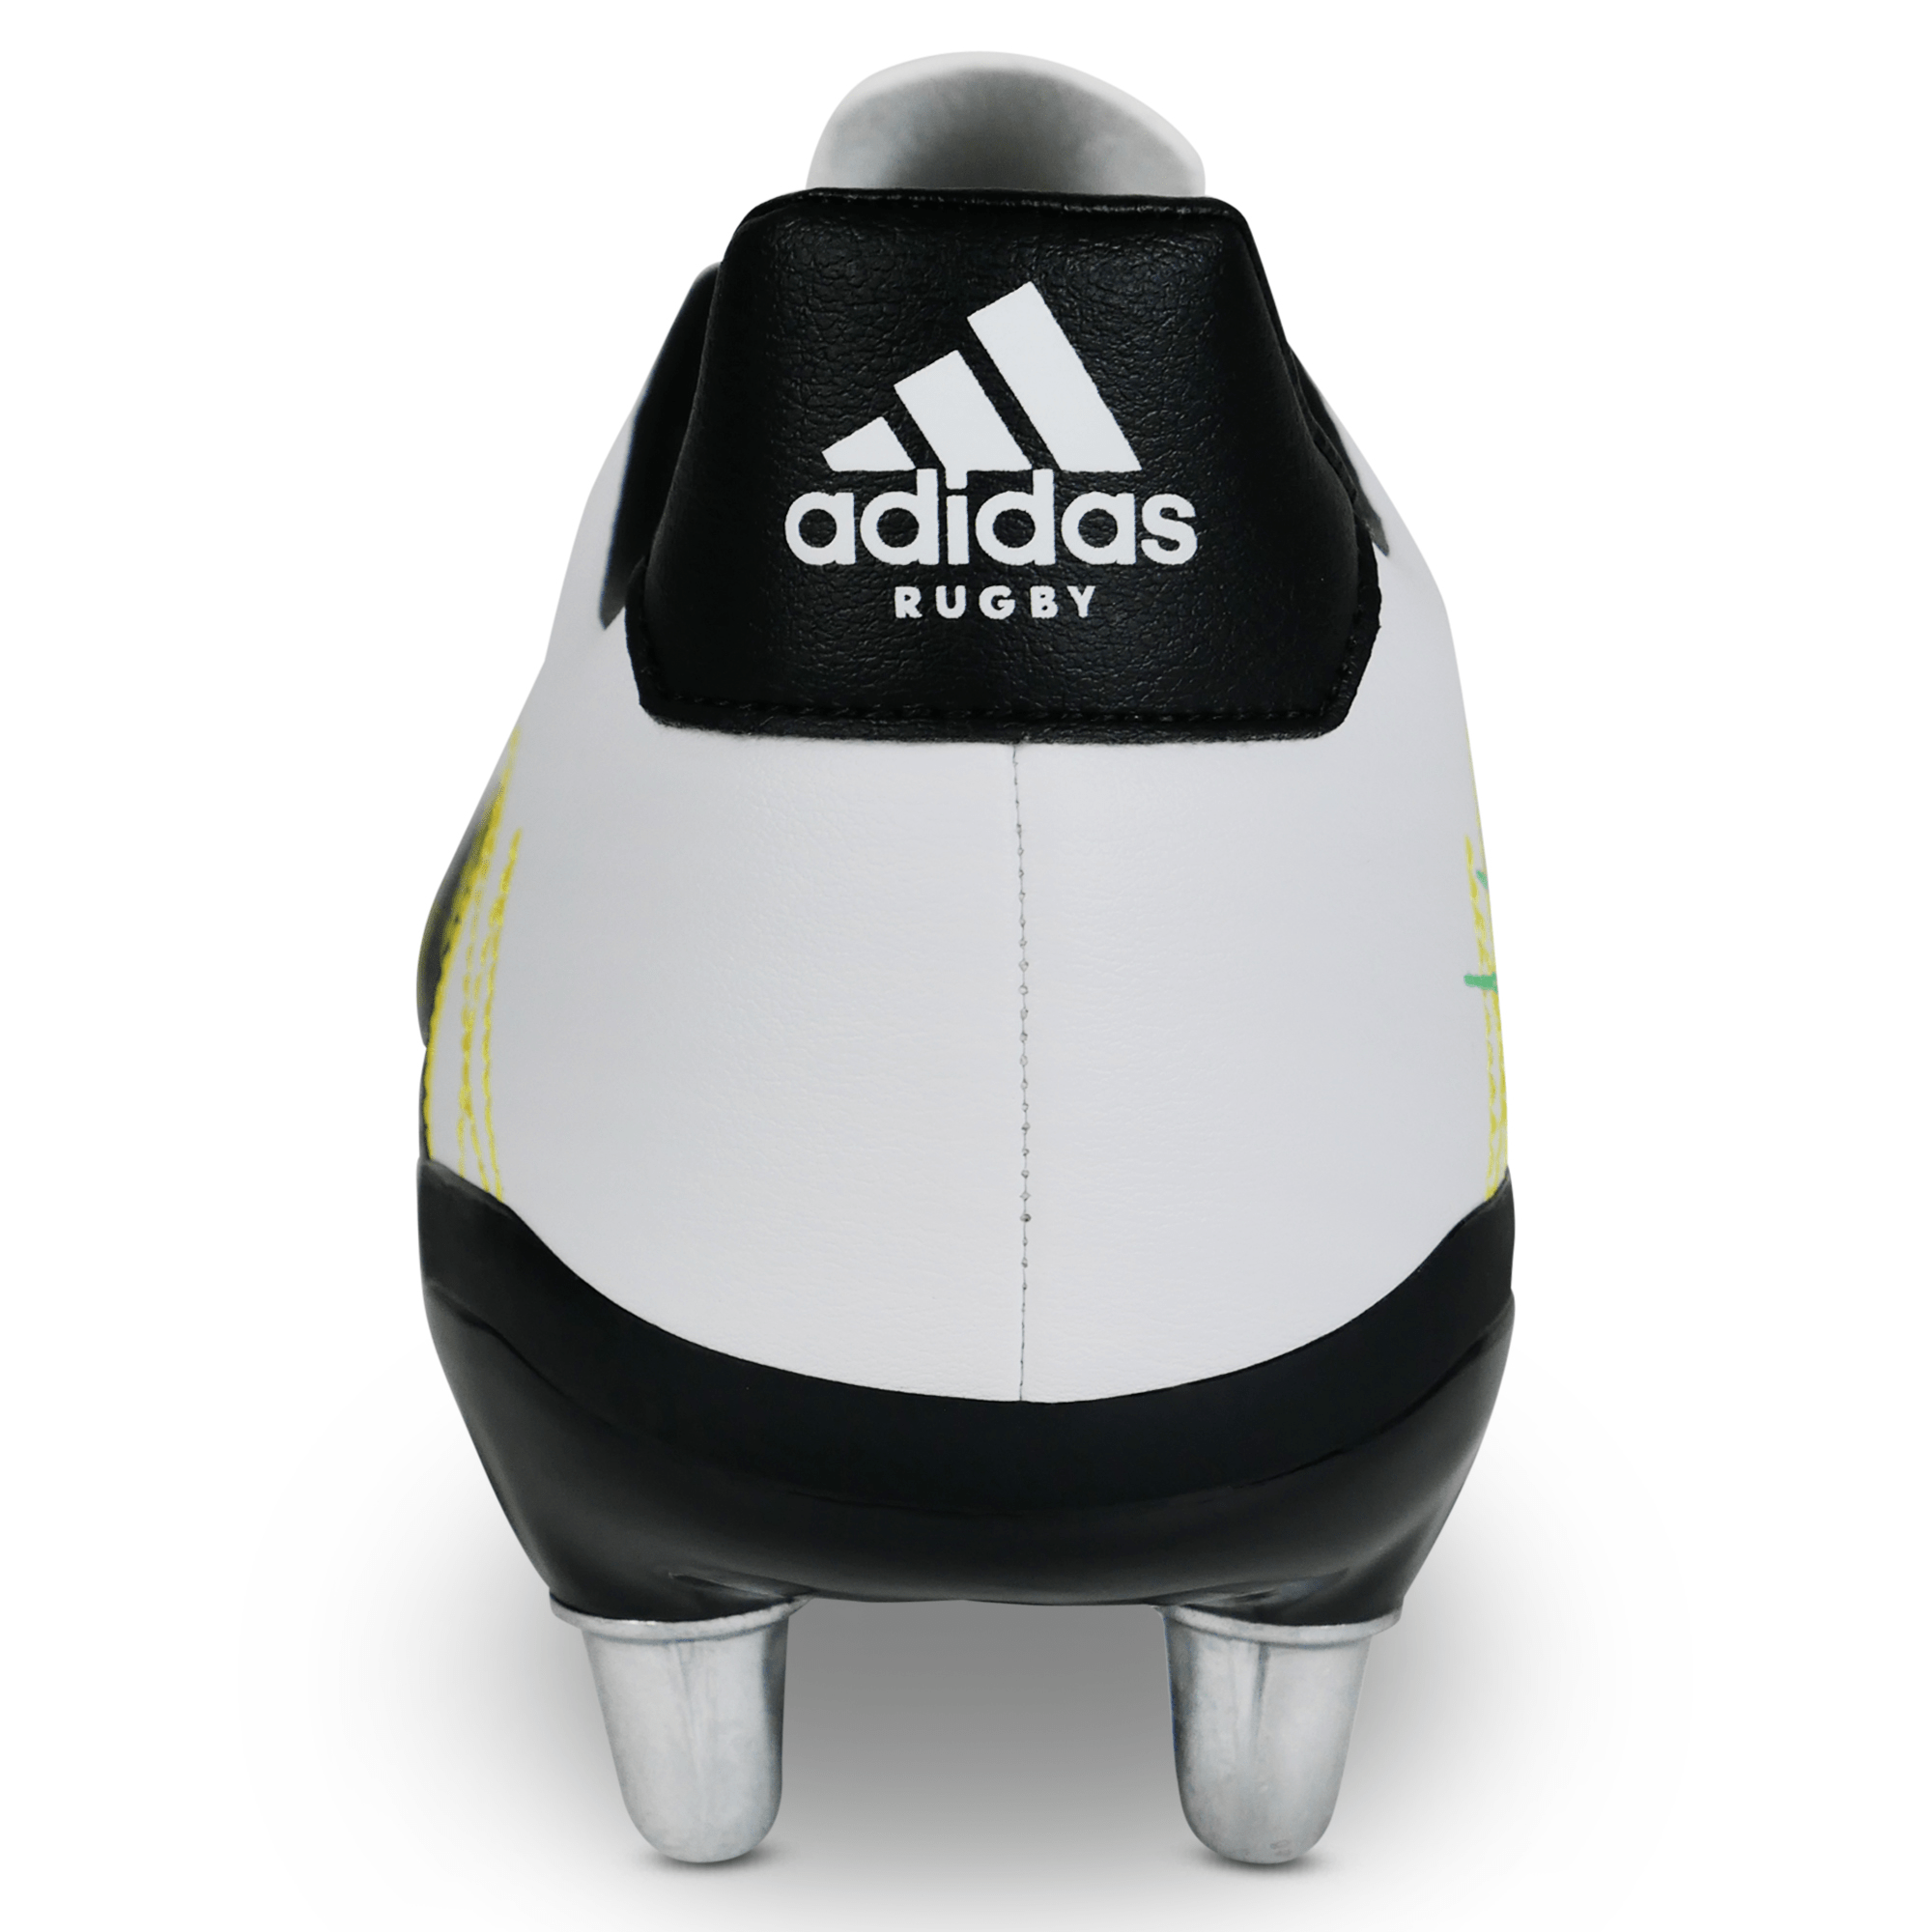 Espinoso Shipley formal Adidas LUZ65 Performance Kakari Rugby Cleat - Soft Ground Boot -  White/Black - SKU GZ4154 - World Rugby Shop